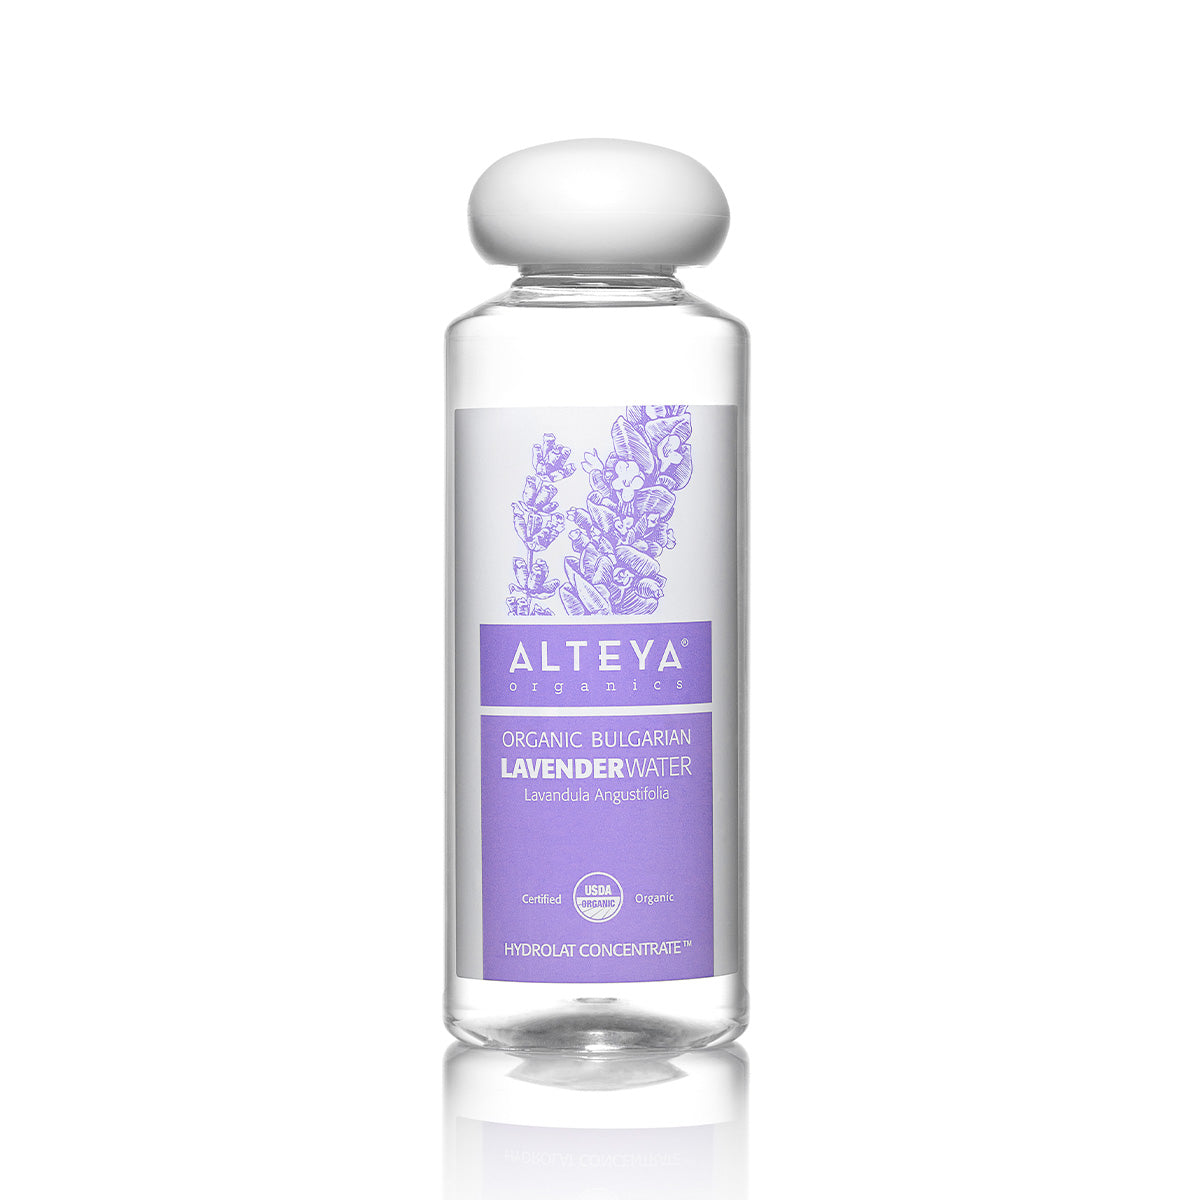 organic lavender blossoms – one of the most valuable and widely used essential oil-bearing plants. By using a unique distillation technique, which embodies century-old traditions and modern technologies we distill special grade lavender flower water that preserves the biodynamic balanced energy of the plant.